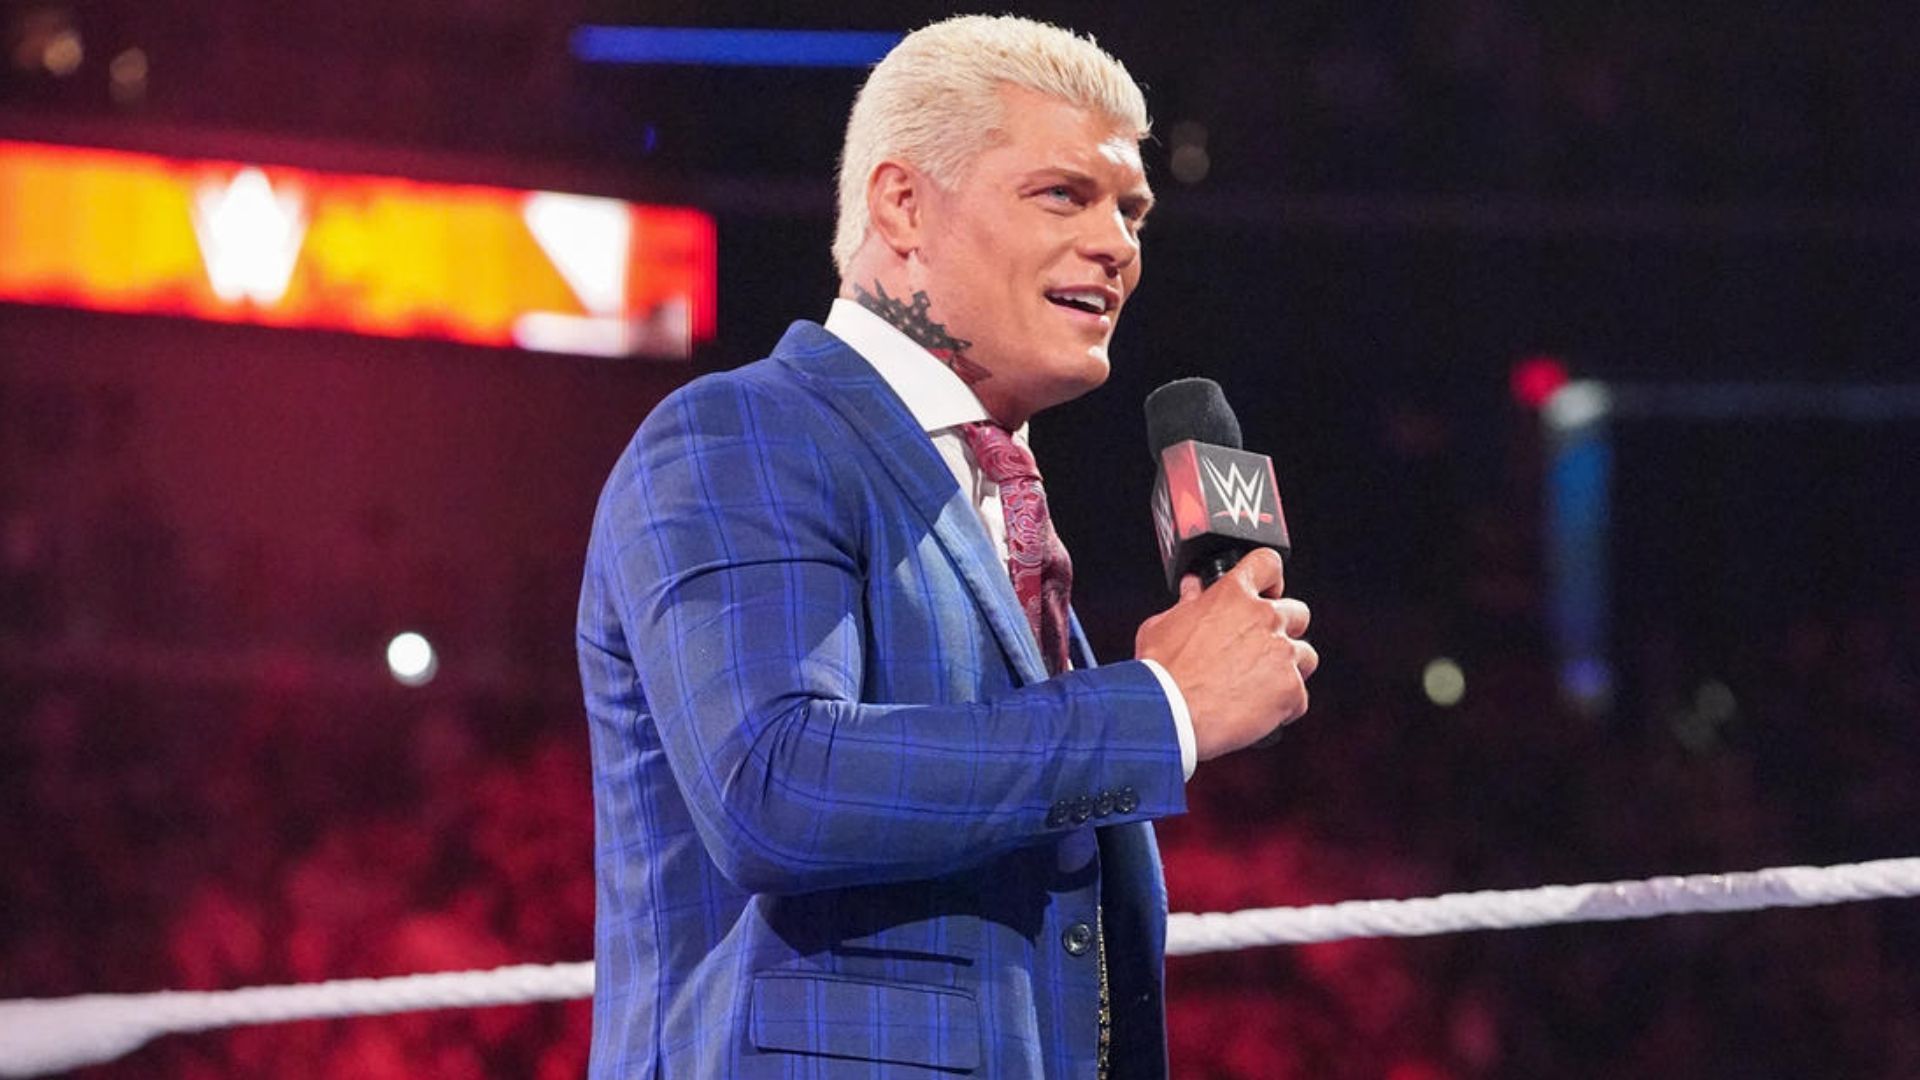 Cody Rhodes is the current top babyface on RAW